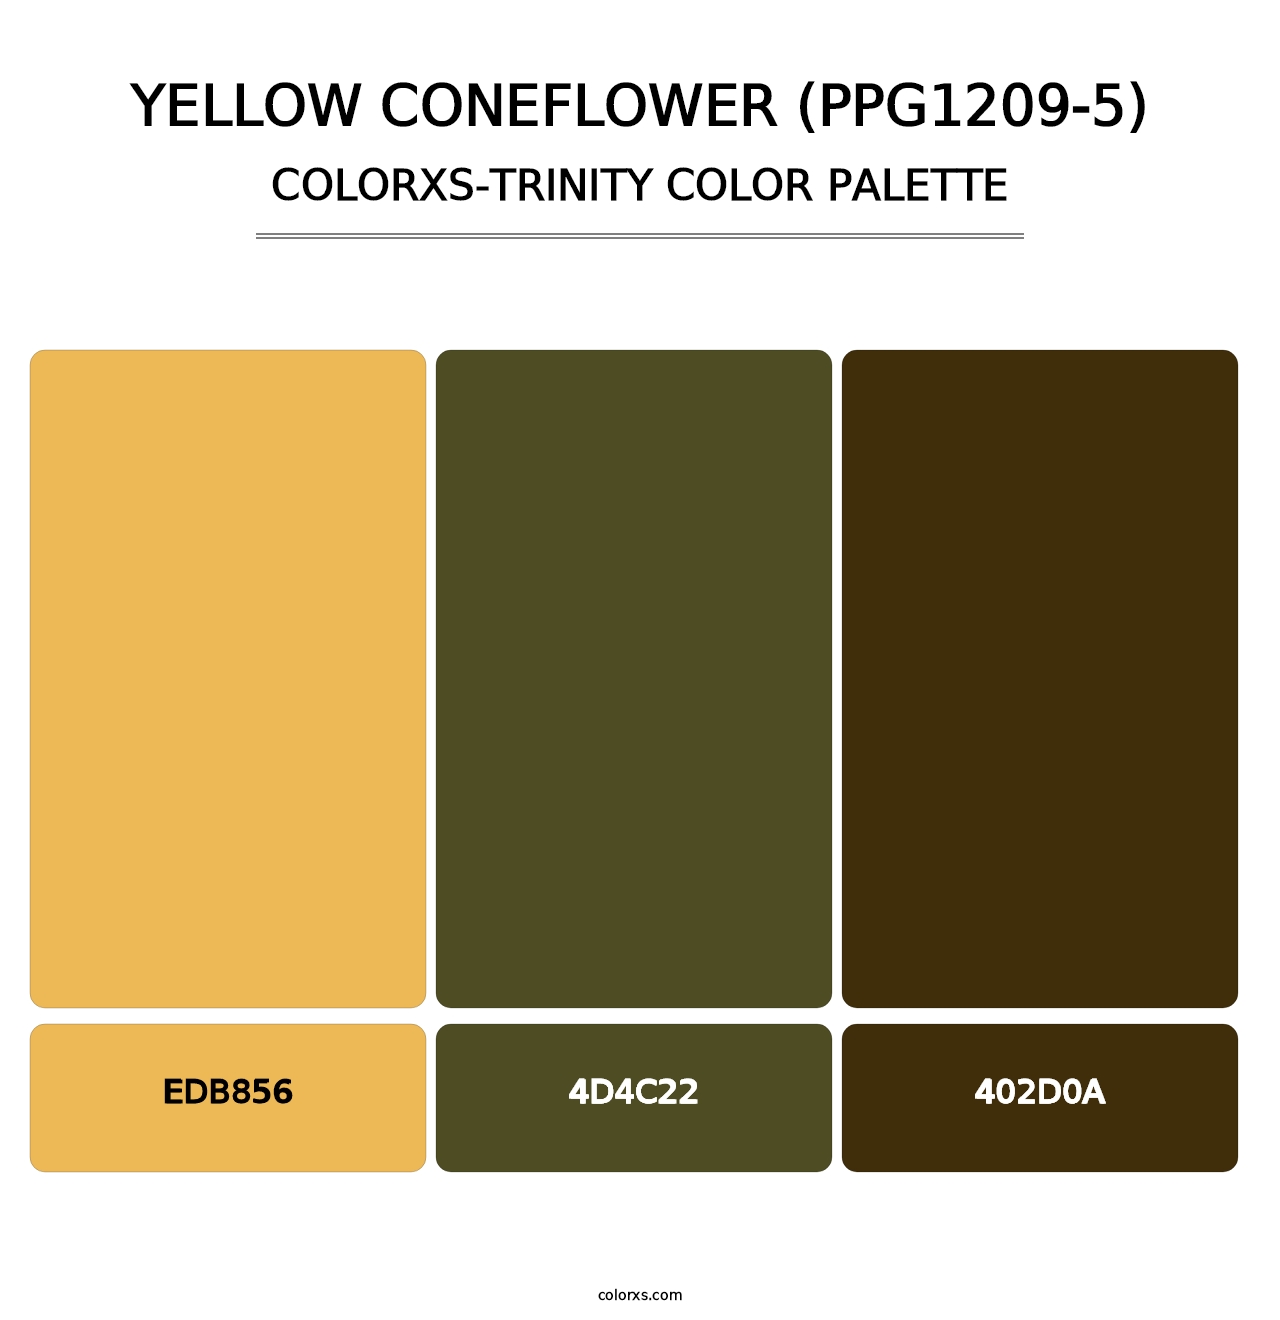 Yellow Coneflower (PPG1209-5) - Colorxs Trinity Palette